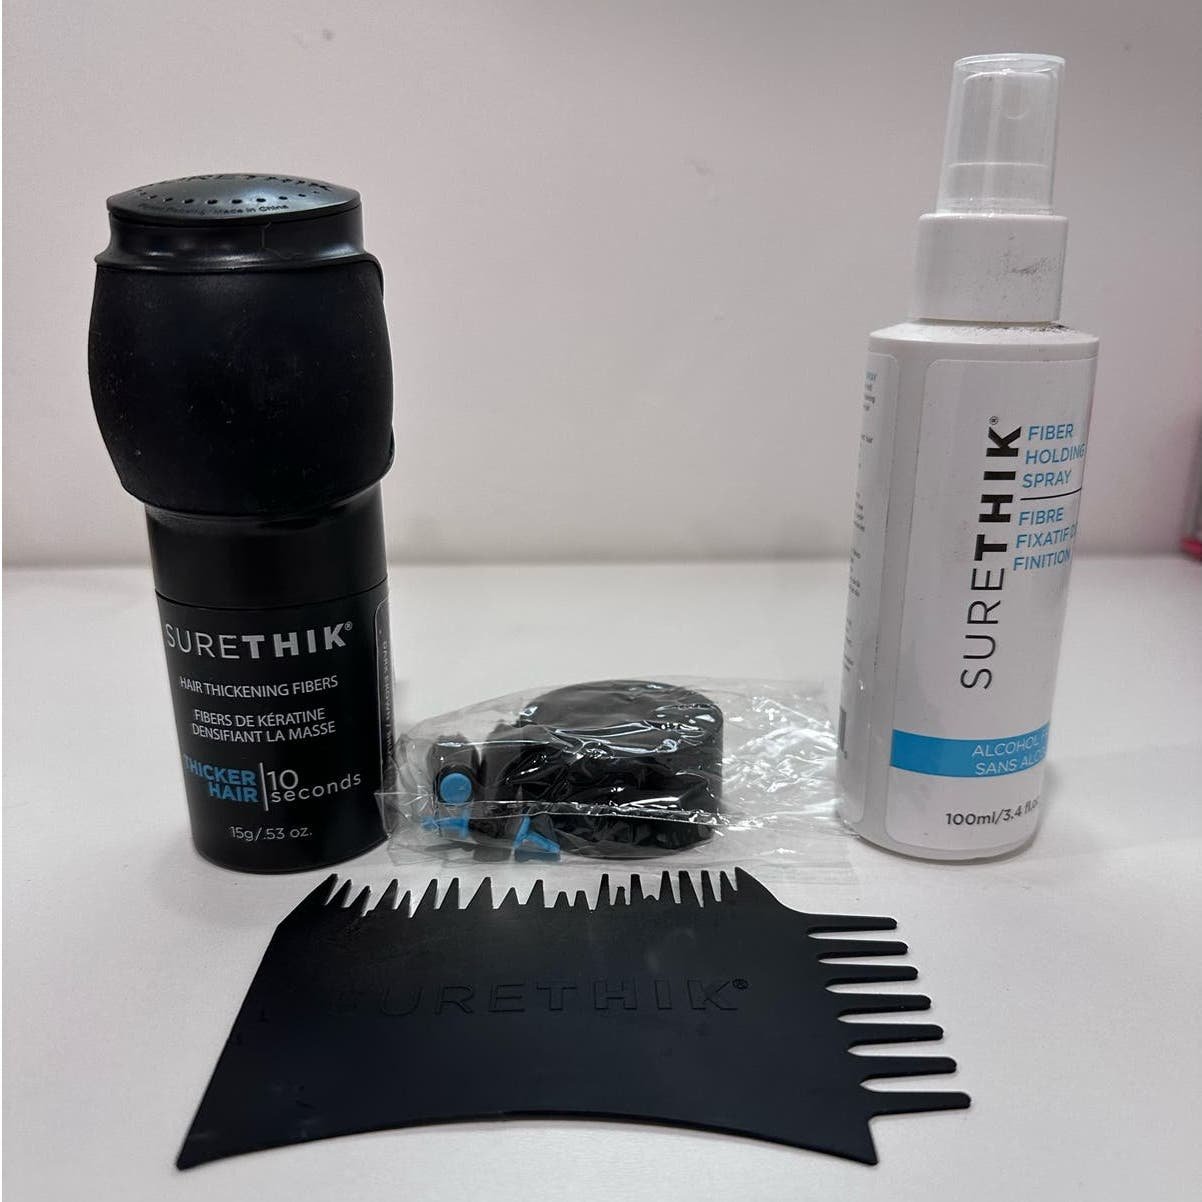 Surethik fibers hair loss starter kit, used only once.  Sells for $49 on sale 3EB7kWYuS